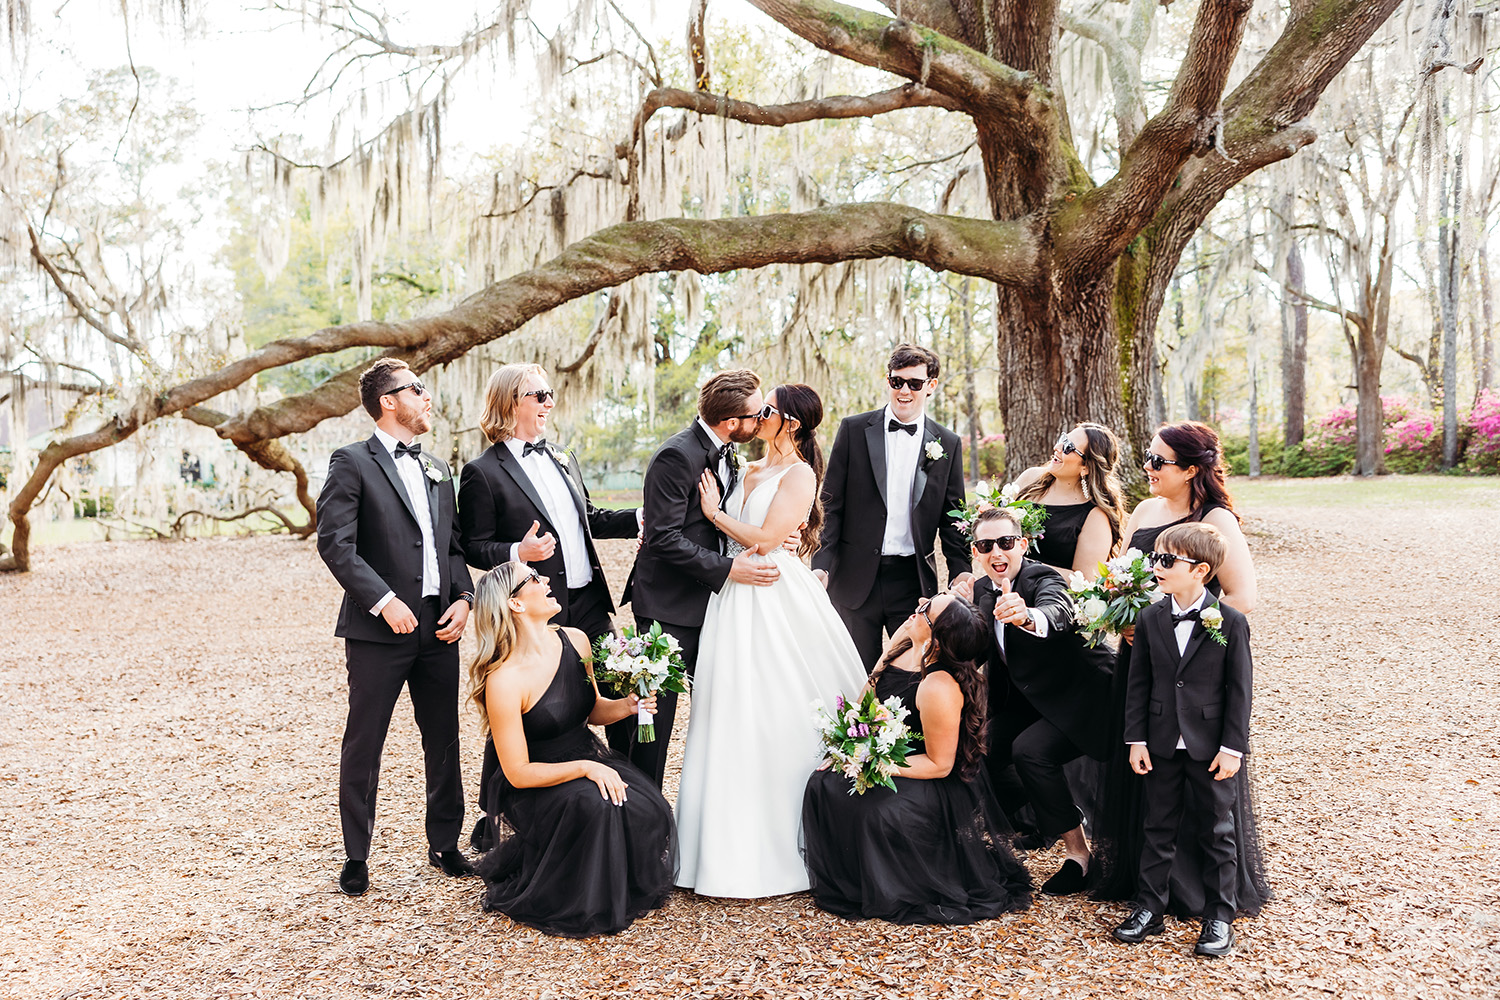 bride and groom kissing surrounded by bridesmaid and groomsmen.